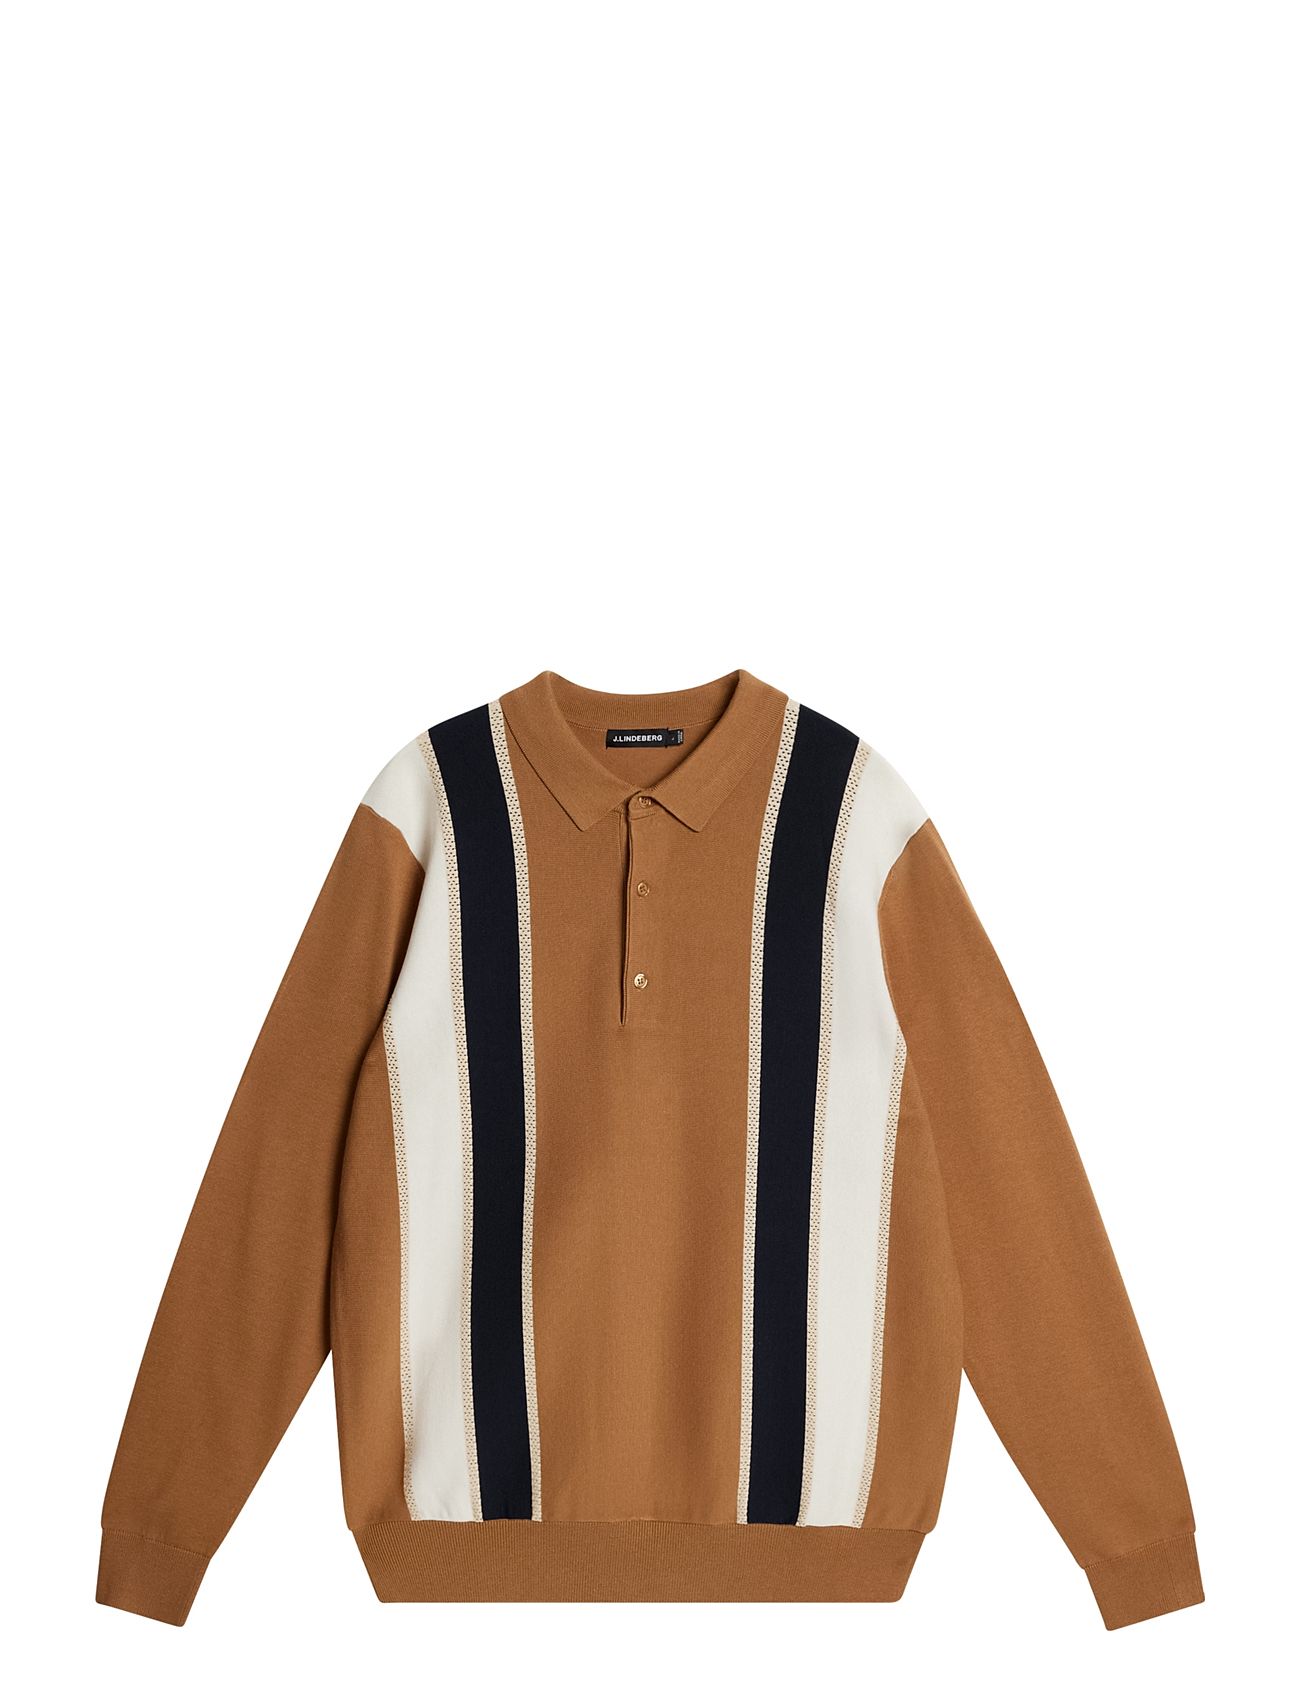 melodrama thespian stemning J. Lindeberg Heden Striped Knitted Polo - Overdele - Boozt.com